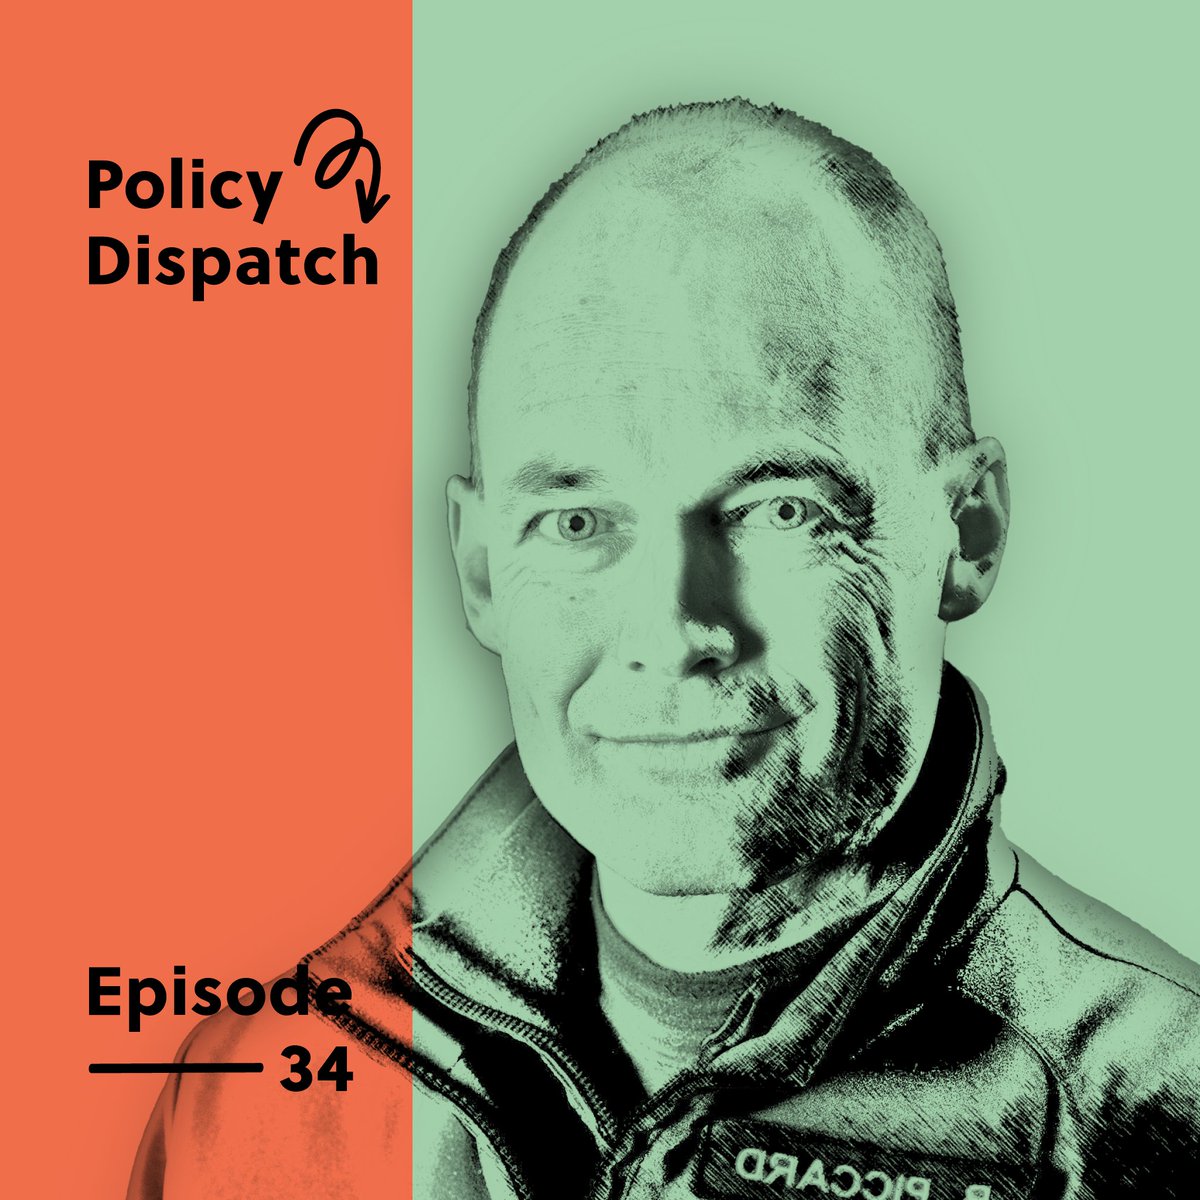 New on Policy Dispatch Podcast: @bertrandpiccard, a world-famous explorer, shares his drive and vision. Could the right attitude be the key to solving the climate crisis? Tune in to find out. #HydrogenPower Listen now on the app: foresightmedia.com/story/sNA4q3Wa…